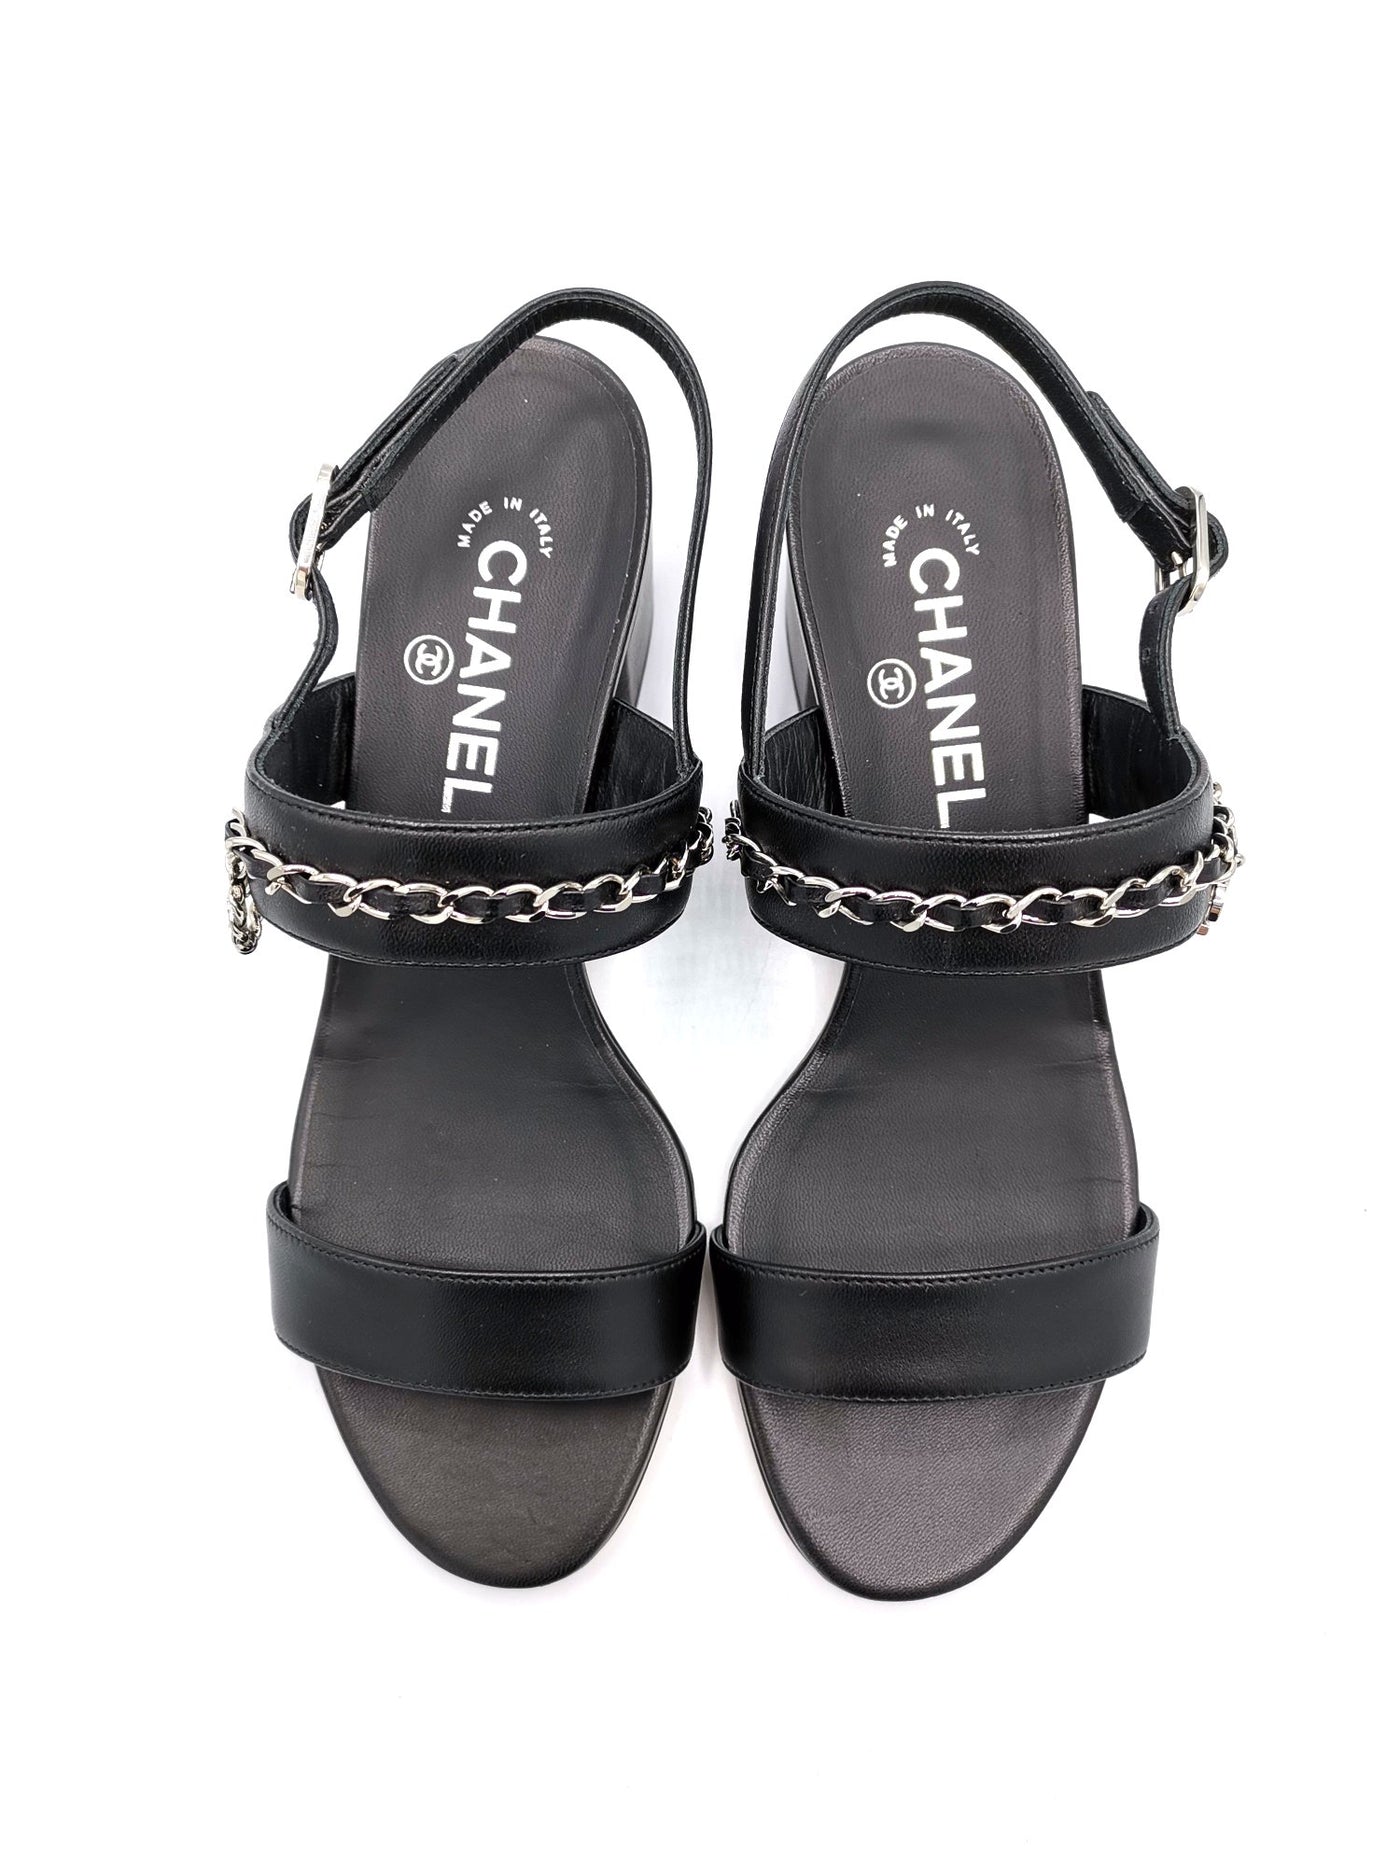 CHANEL lucky charm sandals size 38.5 brand new with box RRP approx. £600